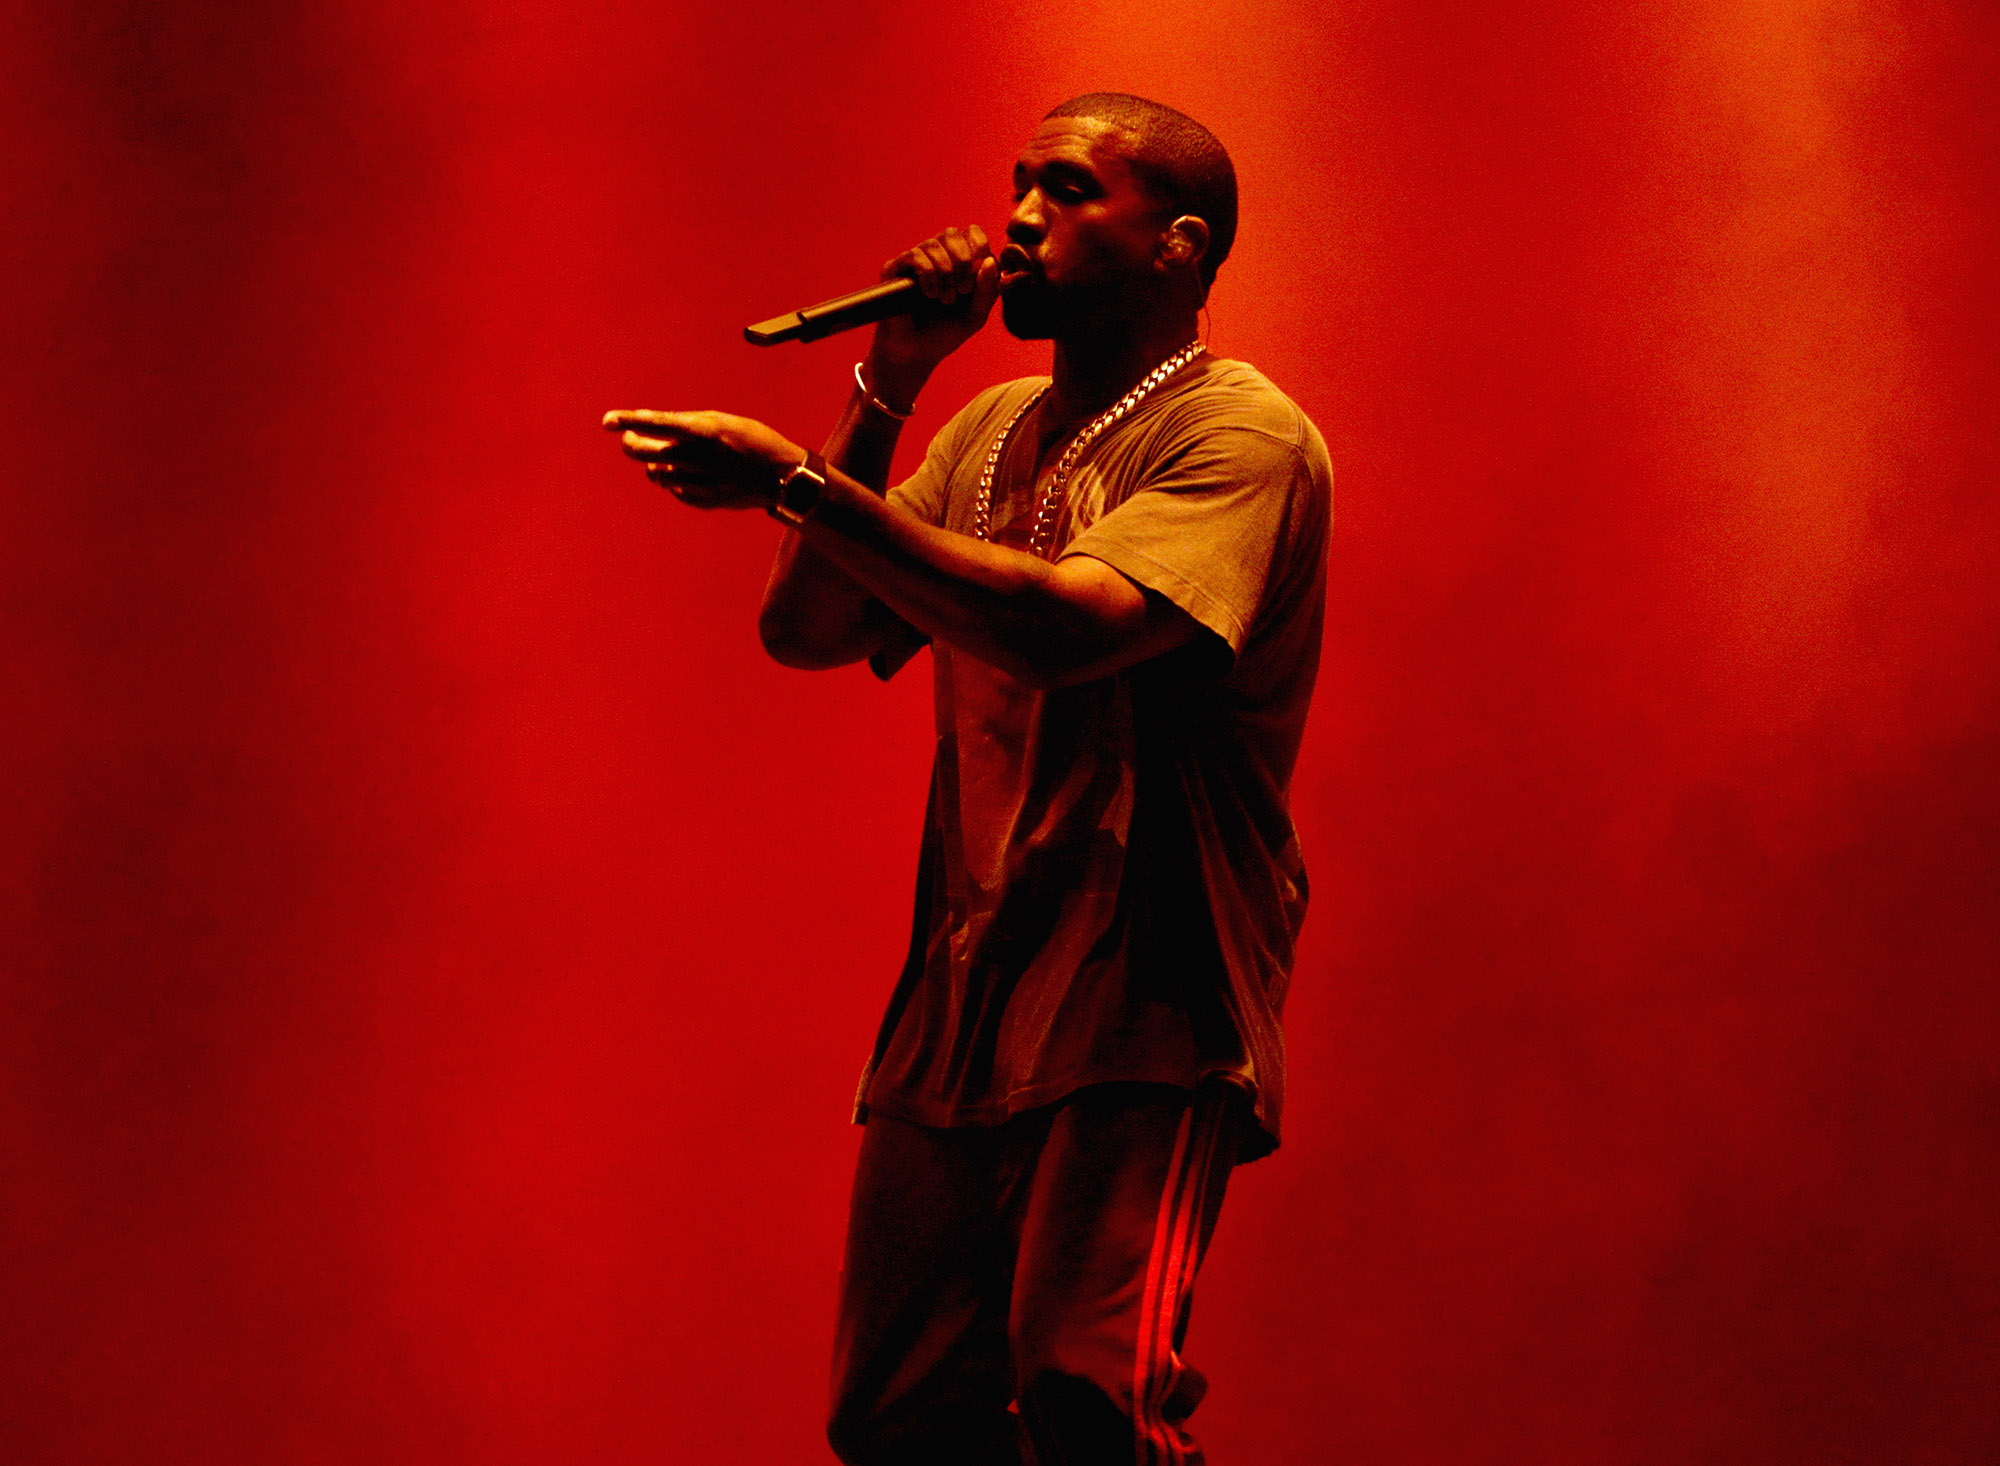 Kanye West performs onstage during The Meadows Music &amp; Arts Festival Day 2 on October 2, 2016 in Queens, New York.  (Photo by Taylor Hill/Getty Images for The Meadows) (Taylor Hill&mdash;Getty Images for The Meadows)